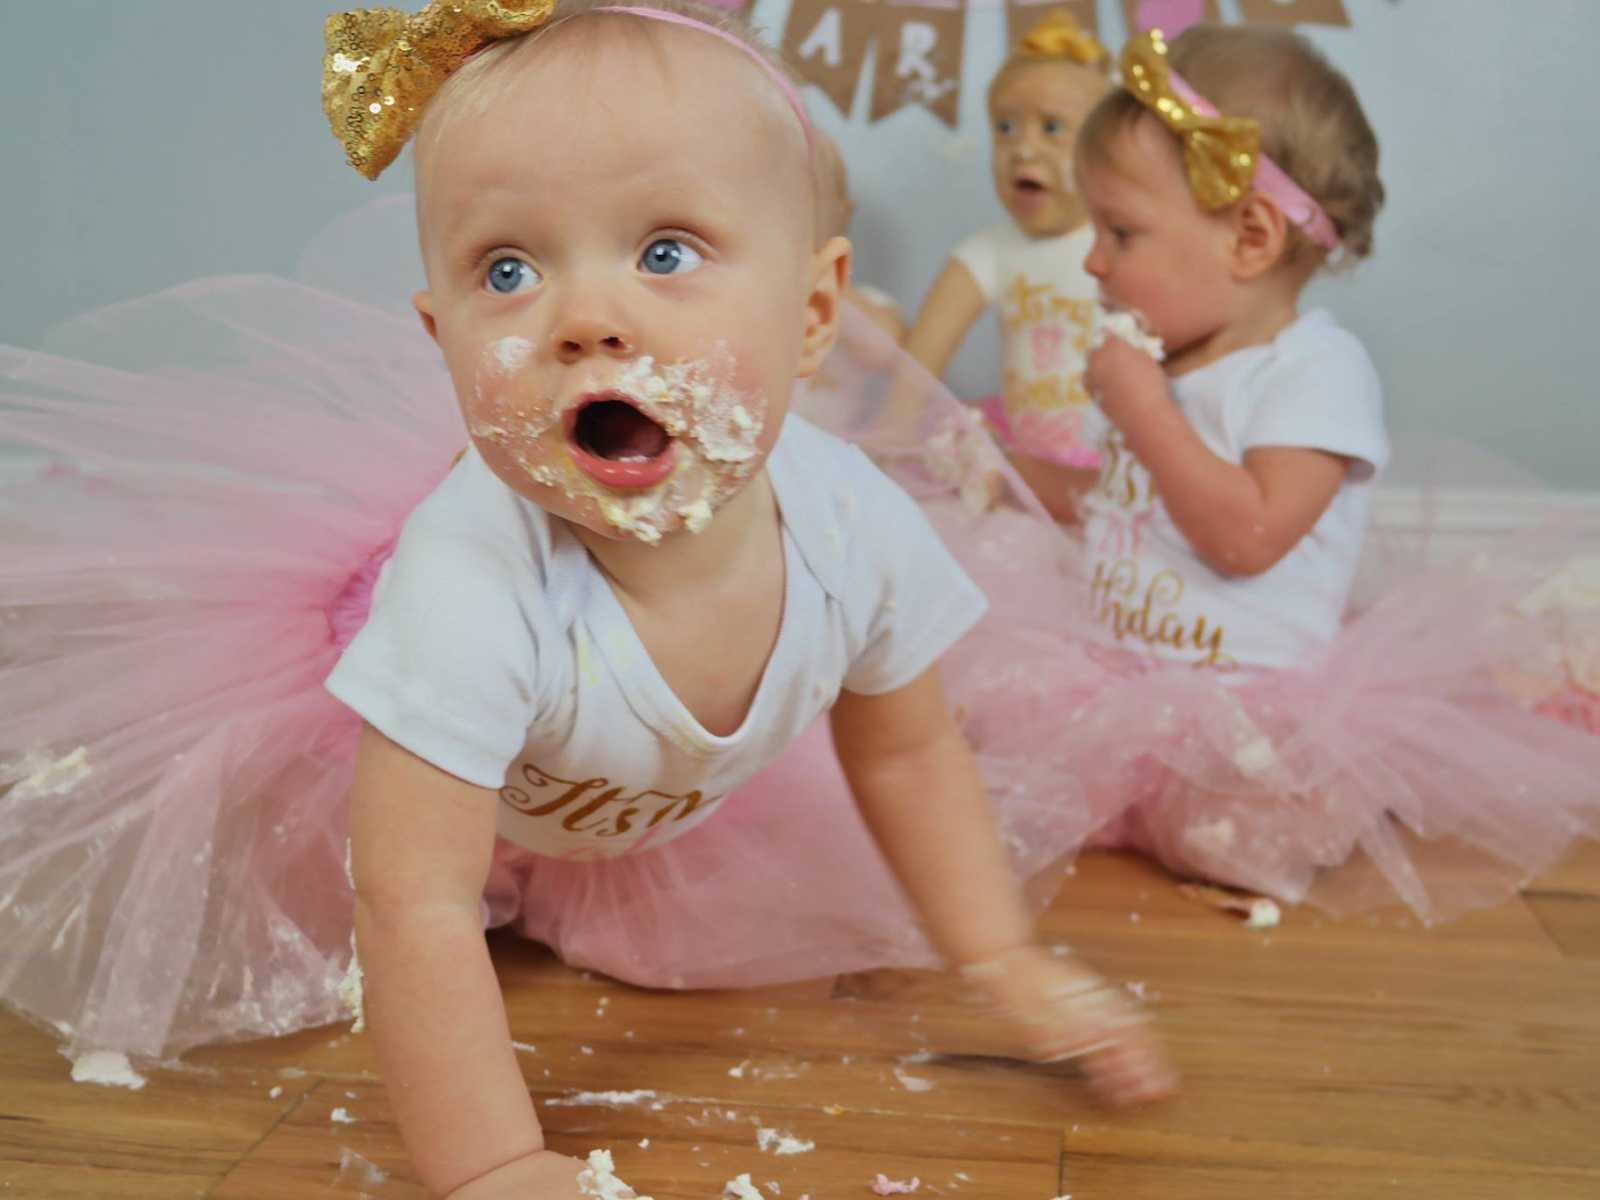 infant girl crawling on ground with cake all over her face with another infant eating cake in background